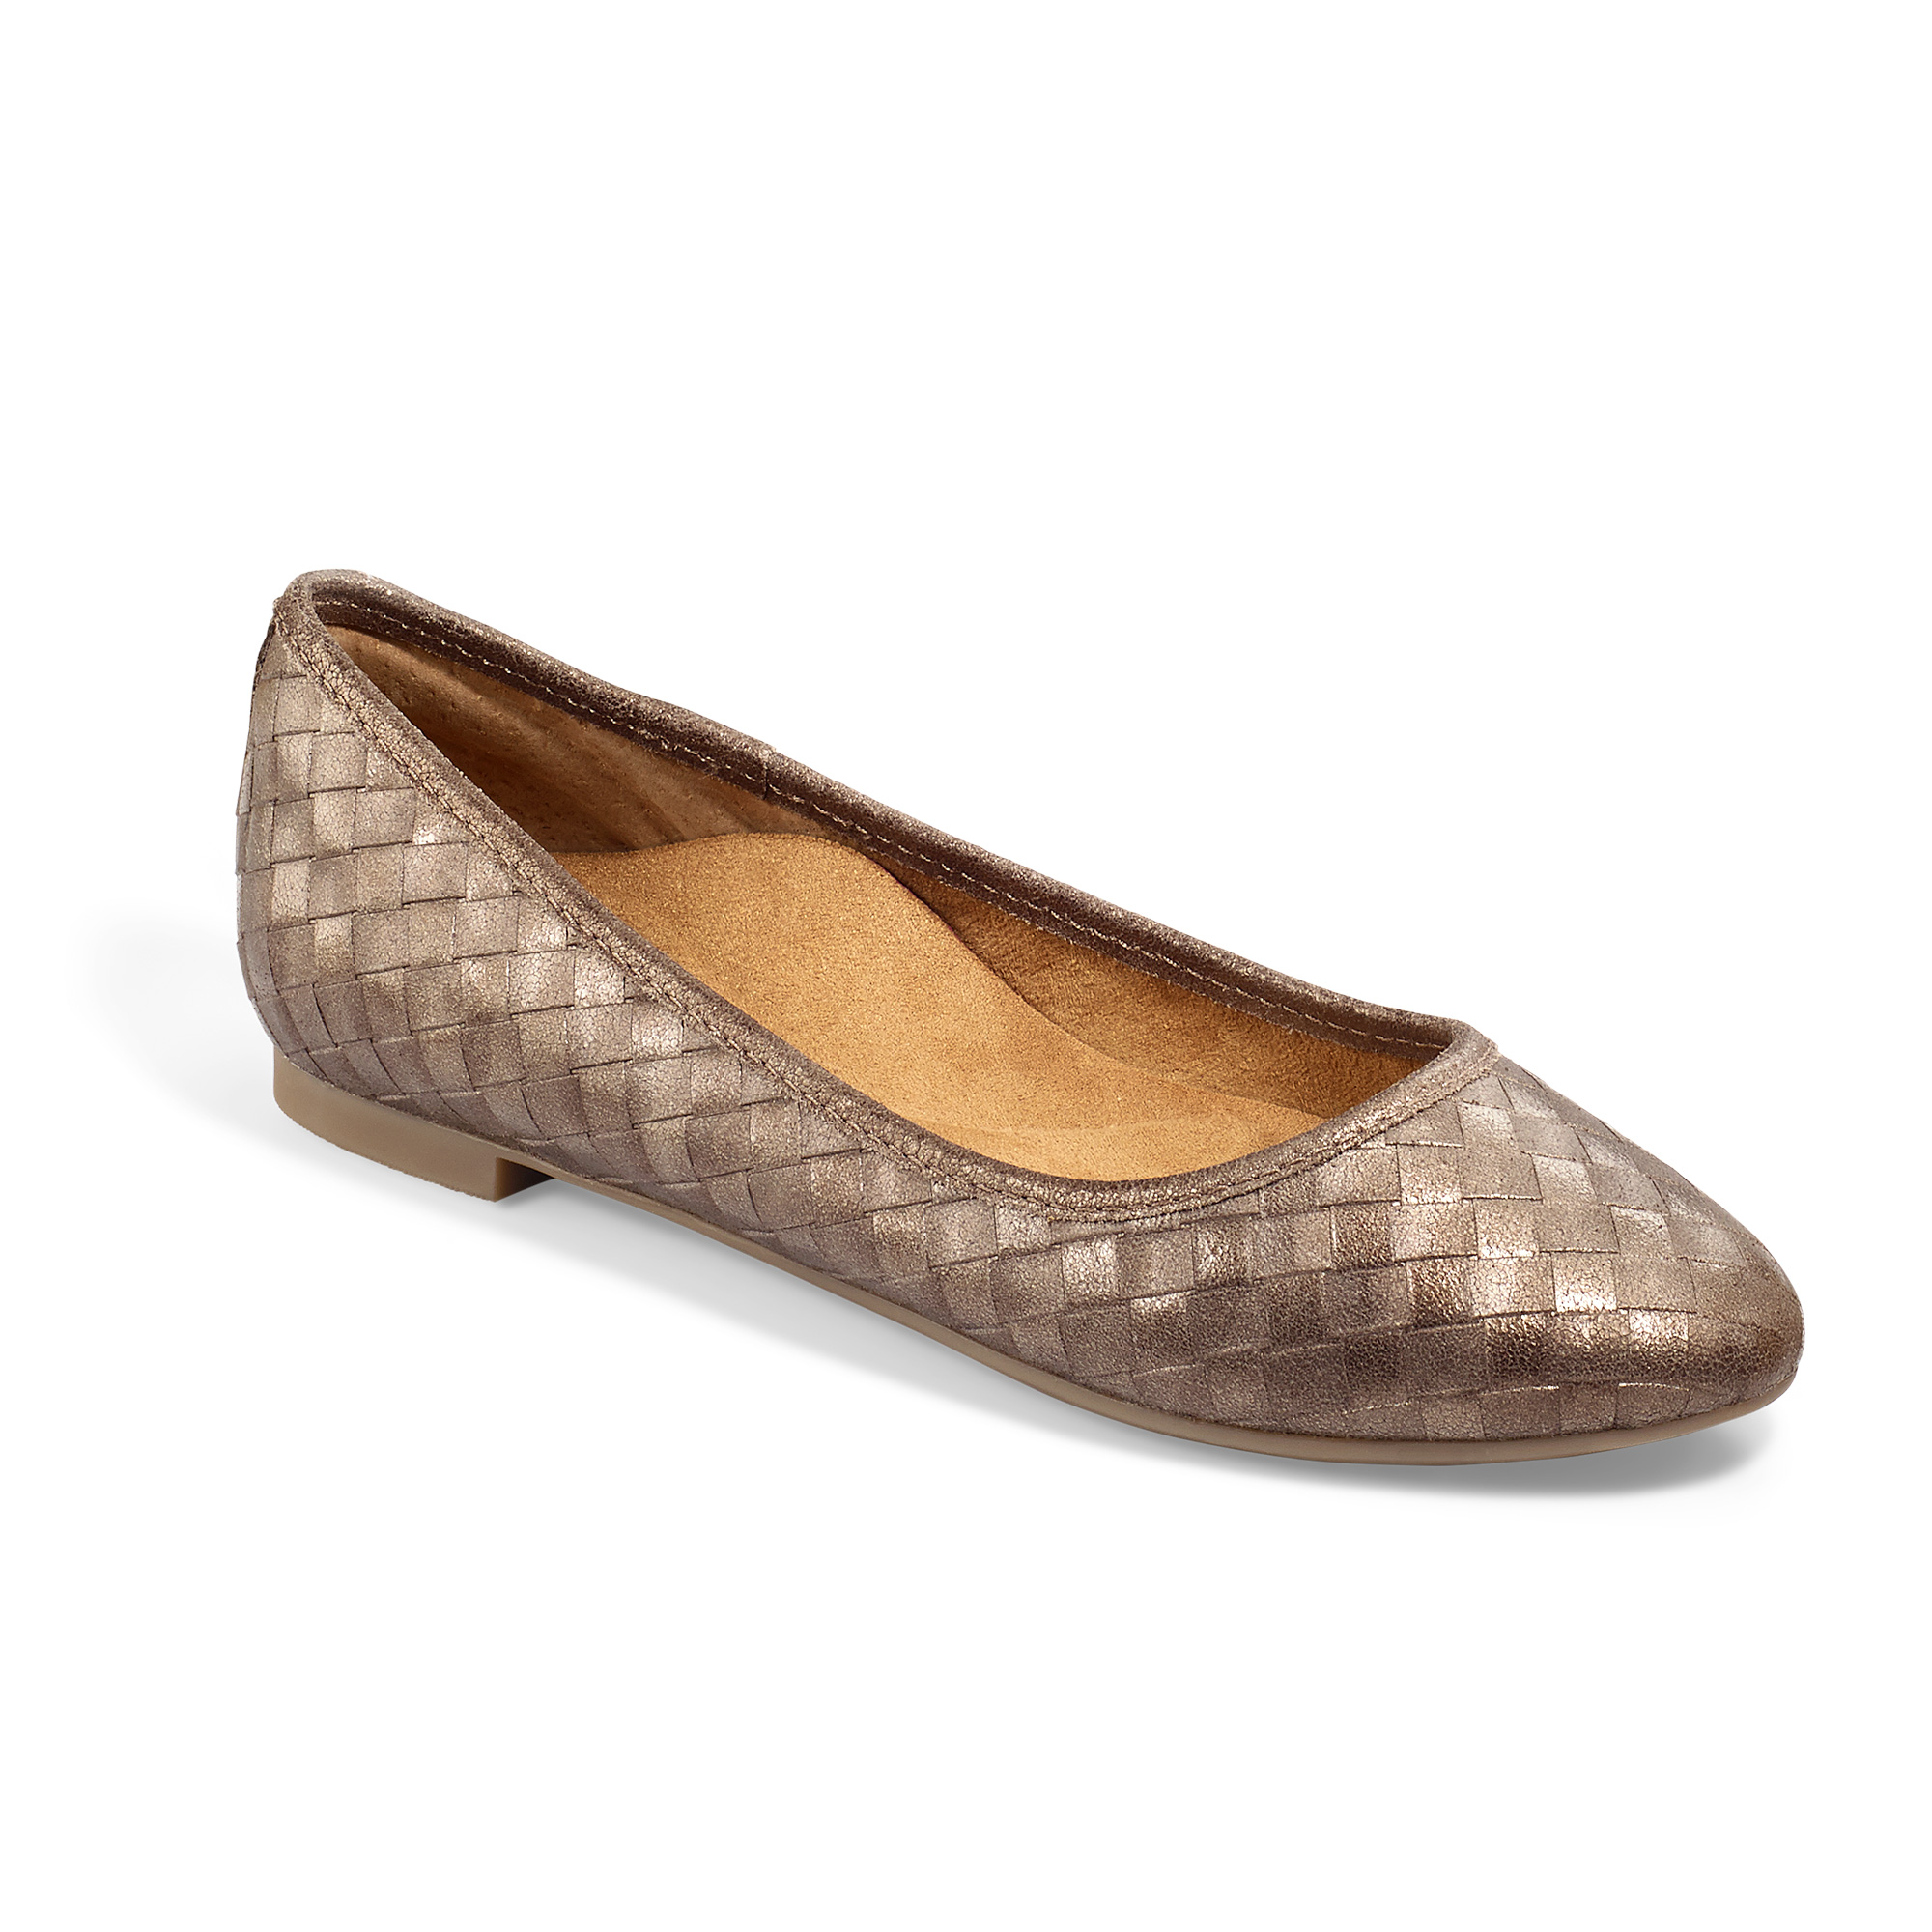 narrow ballet flats with arch support